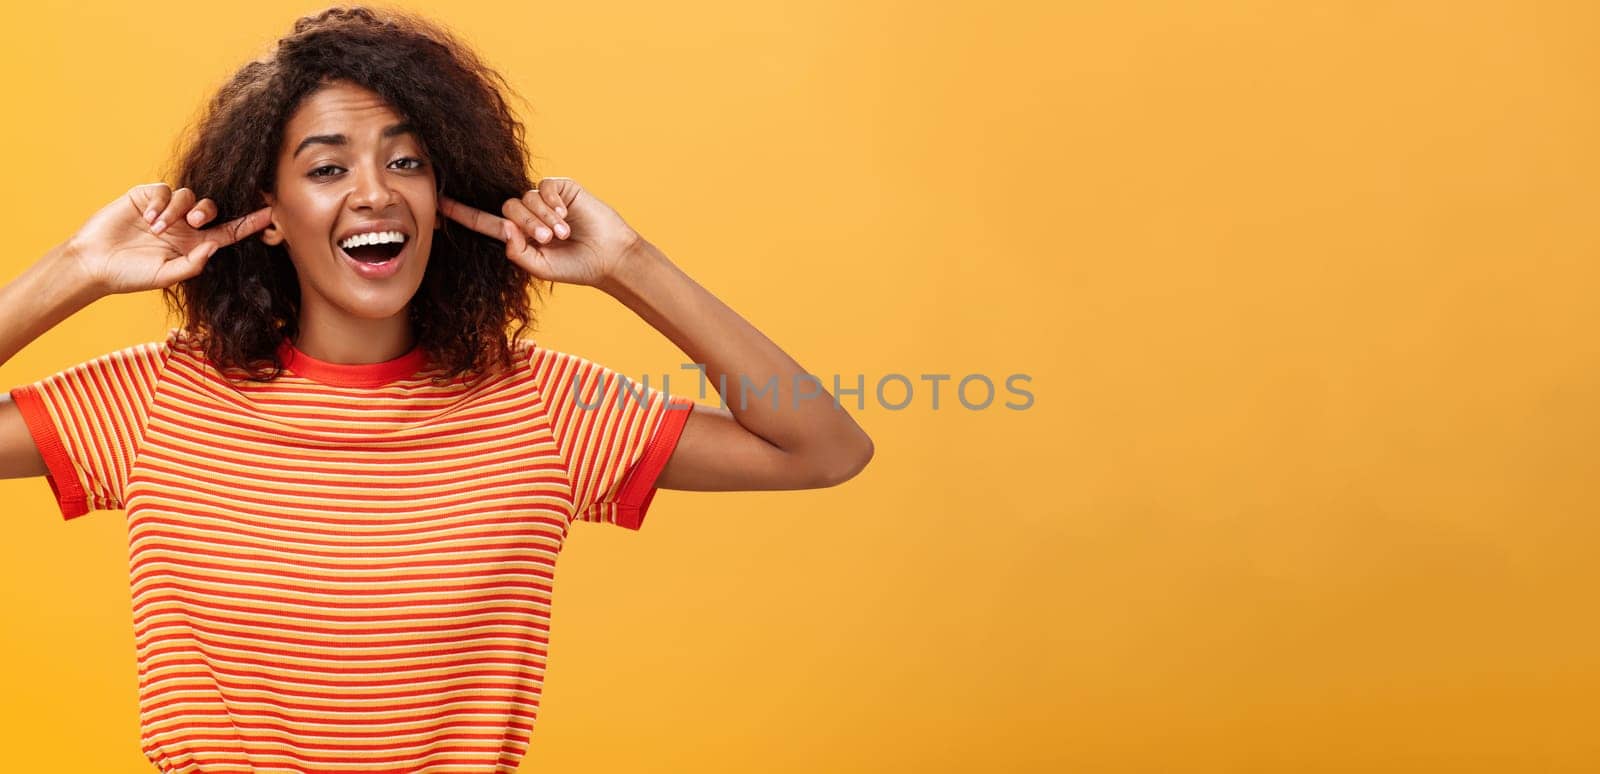 Do not care what saying cannot hear you. Carefree indifferent good-looking african american woman with curly hairstyle closing ears with index finger singing lalala during argument behaving childish.